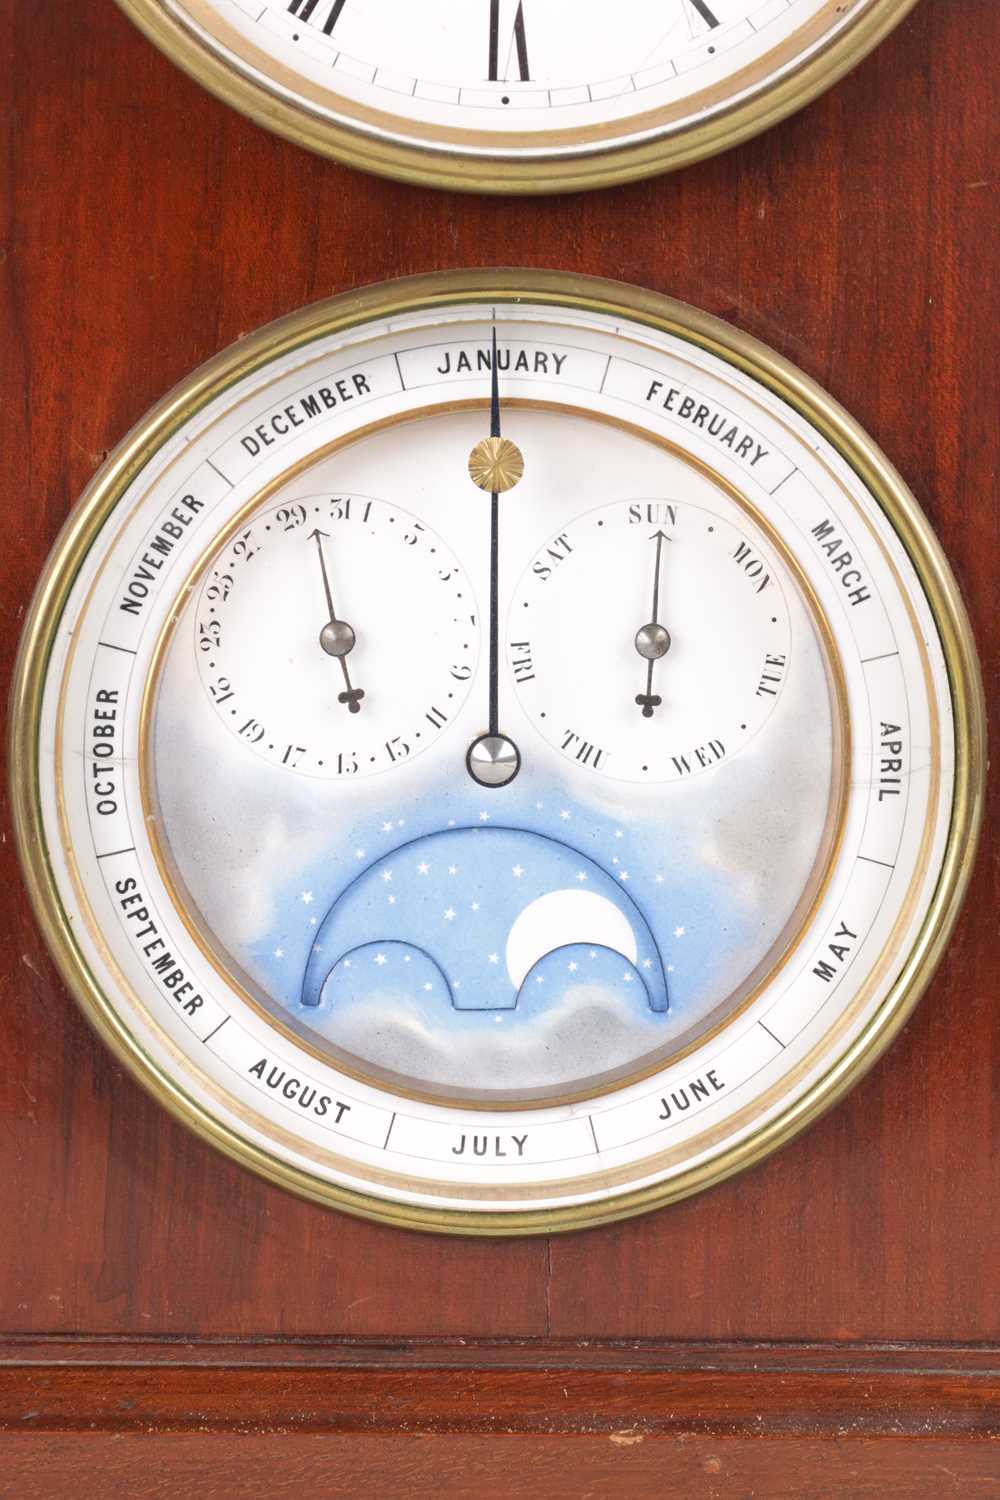 AN EARLY 20TH CENTURY FRENCH PERPETUAL CALENDAR AND MOONPHASE MANTEL CLOCK - Image 3 of 13